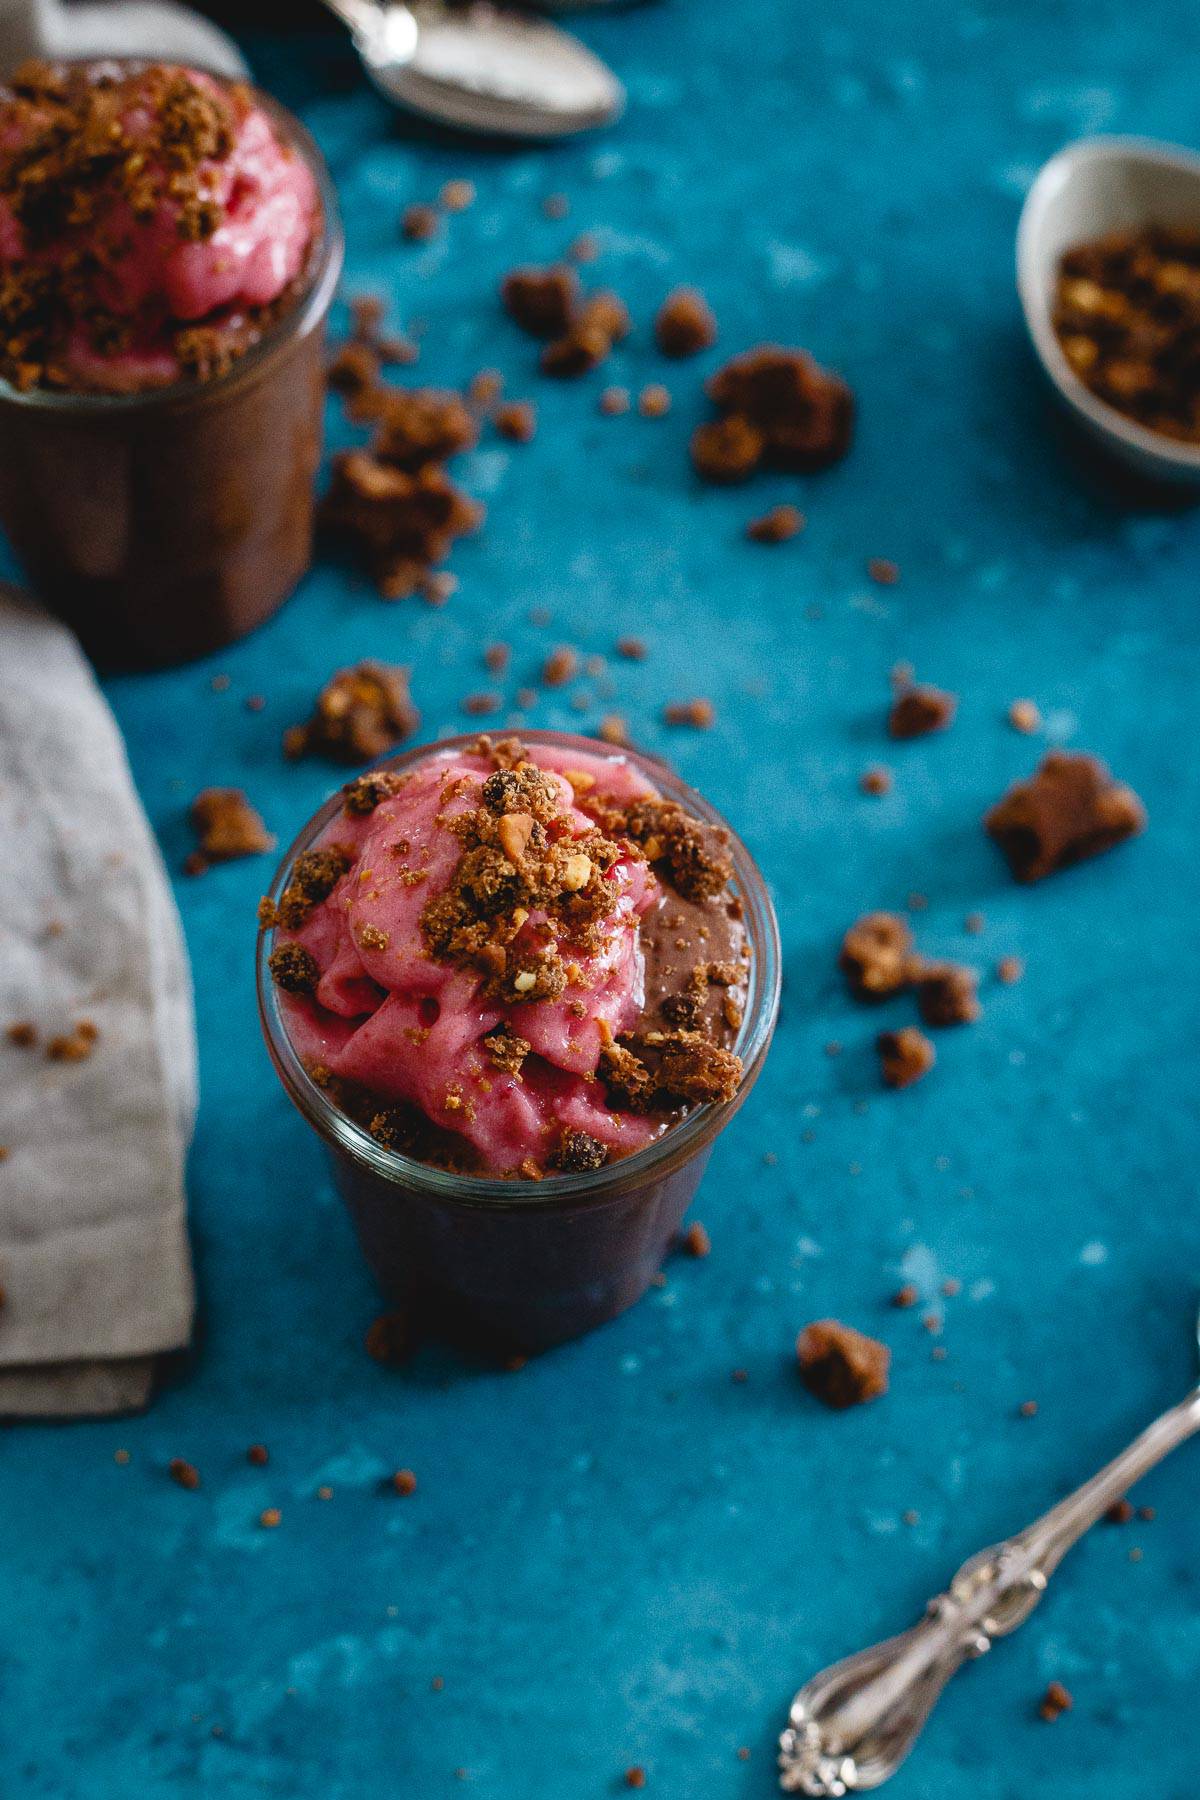 With peanut butter chocolate chip crumbles and frozen strawberries, this peanut butter chocolate chia pudding is decadent yet healthy!